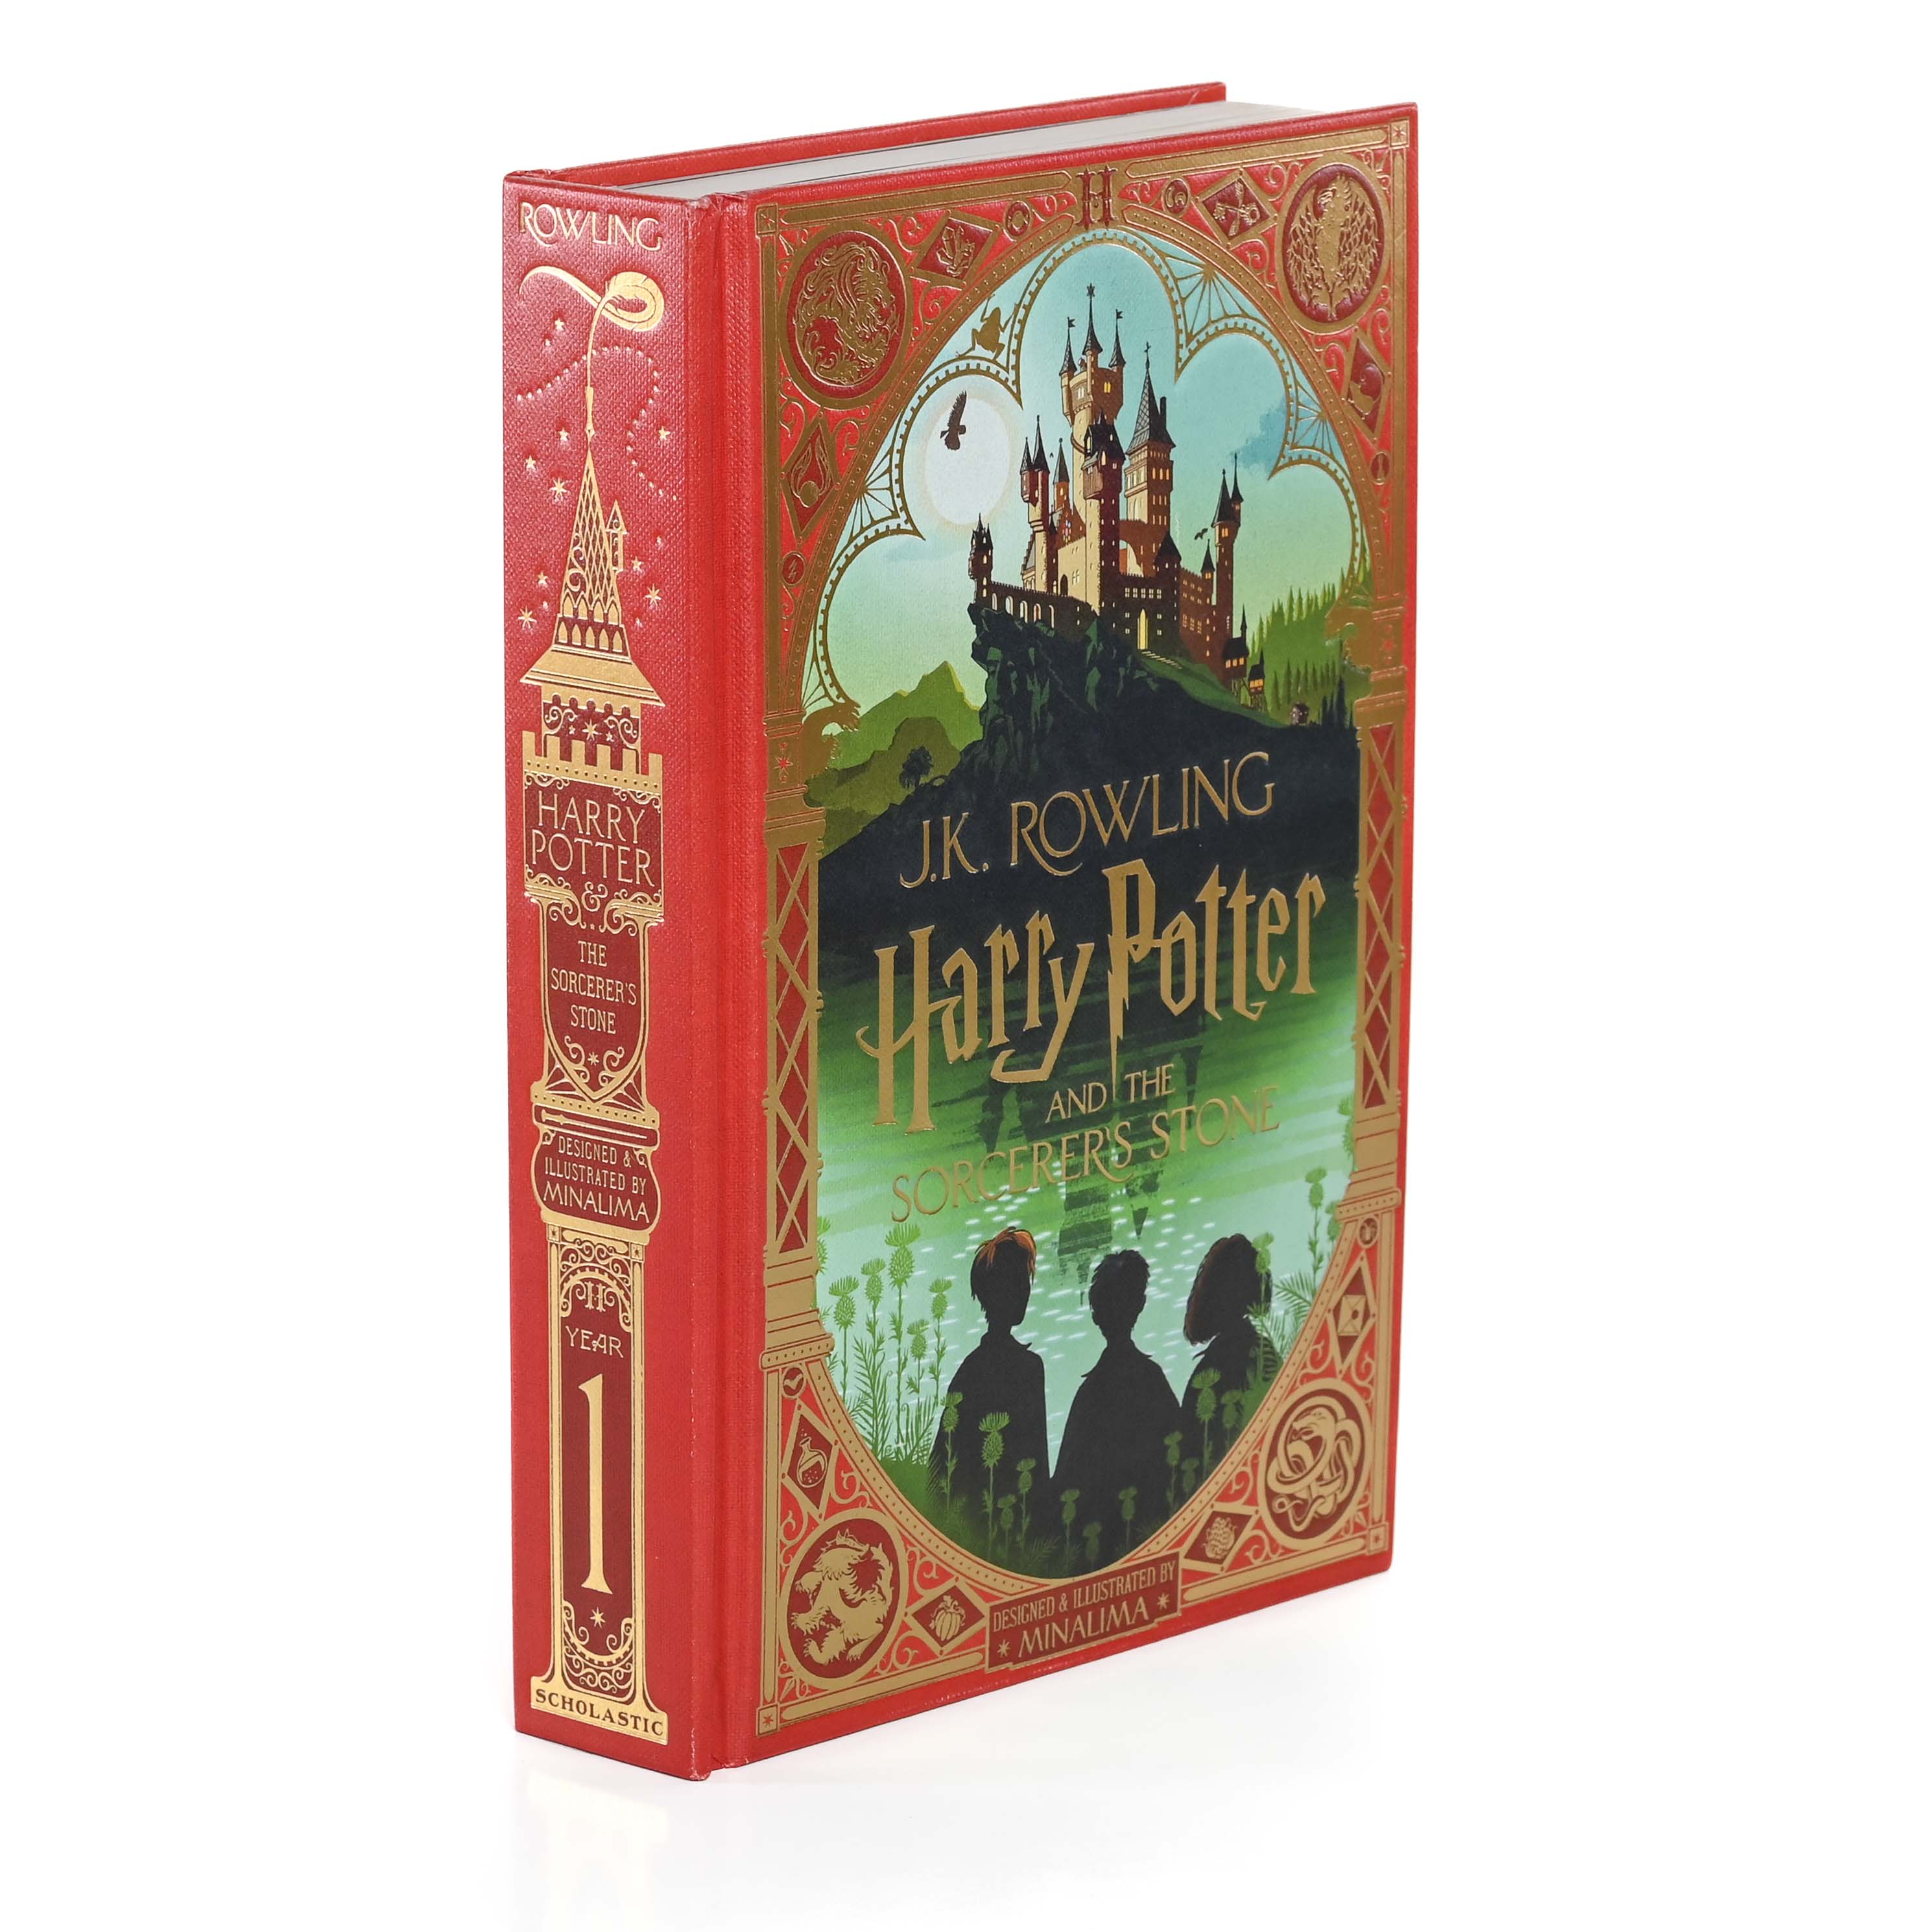 Harry Potter Mina Lima Edition Series Collection 2 Books Set by J.K.  Rowling NEW